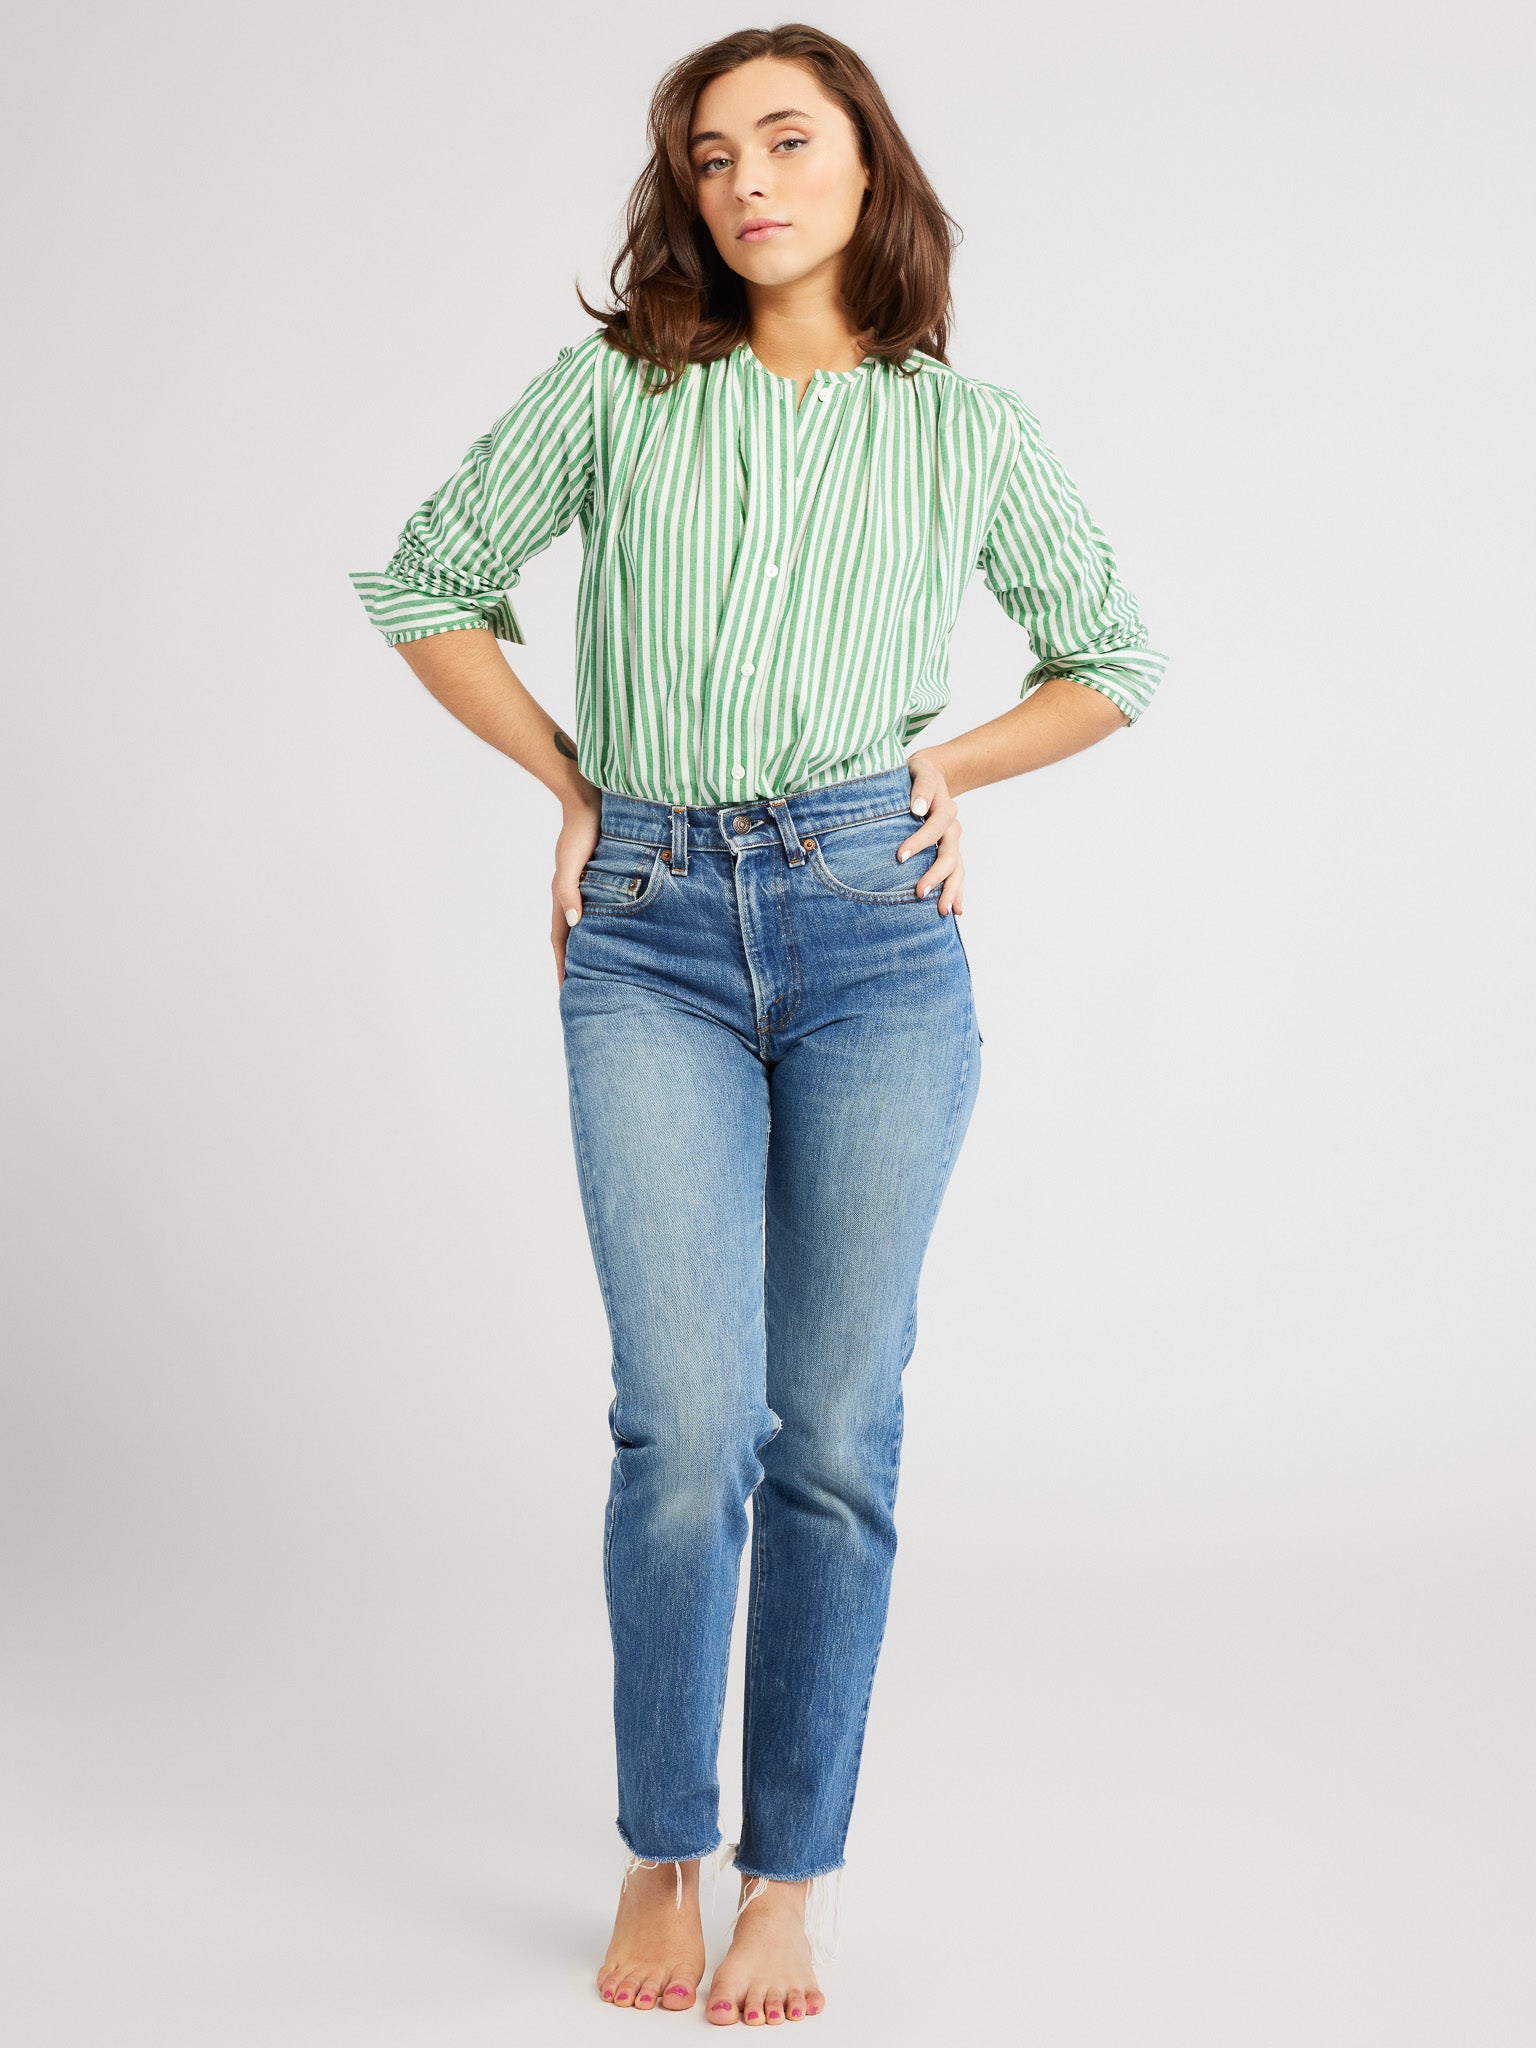 MILLE Clothing Florian Top in Kelly Stripe